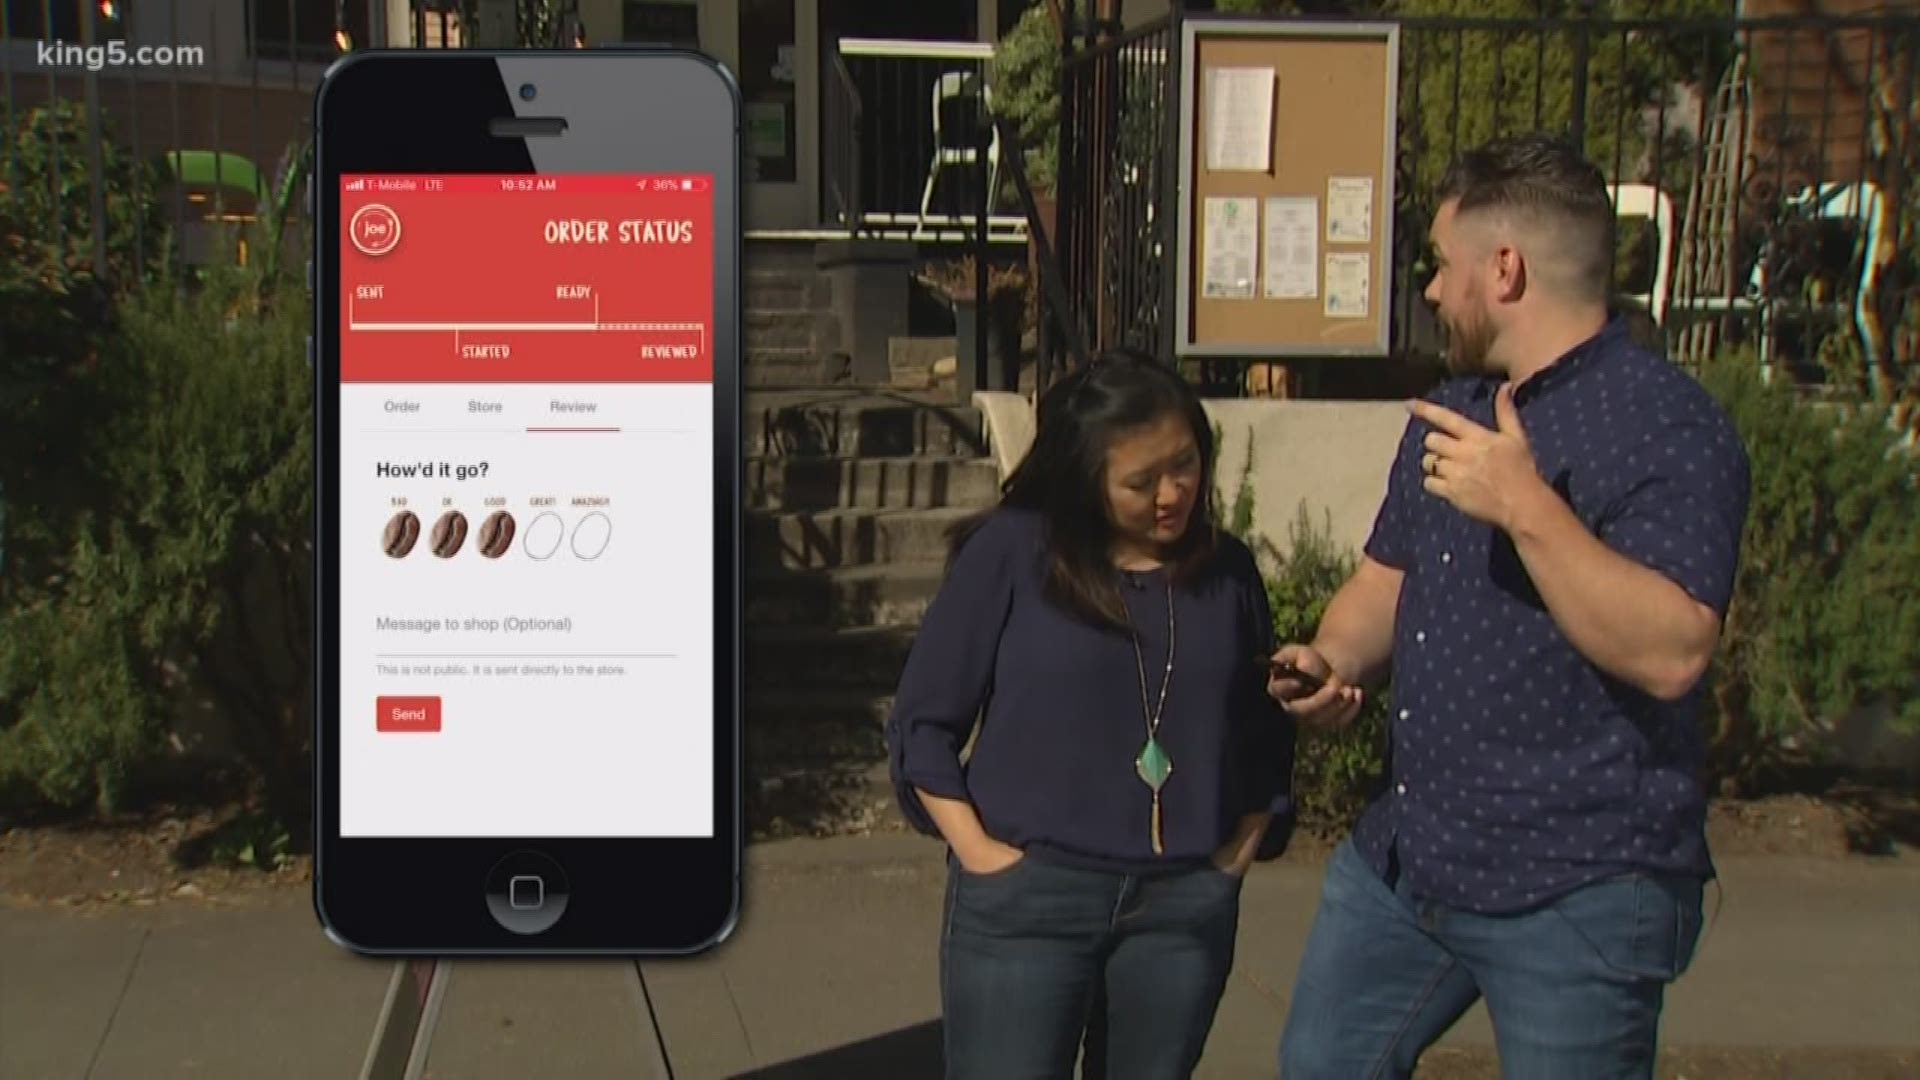 Now you can make mobile orders on your phone at your favorite independent coffee shops! KING 5's Michelle Li shows viewers how the Joe Coffee app can make going to your local coffee shop more convenient.